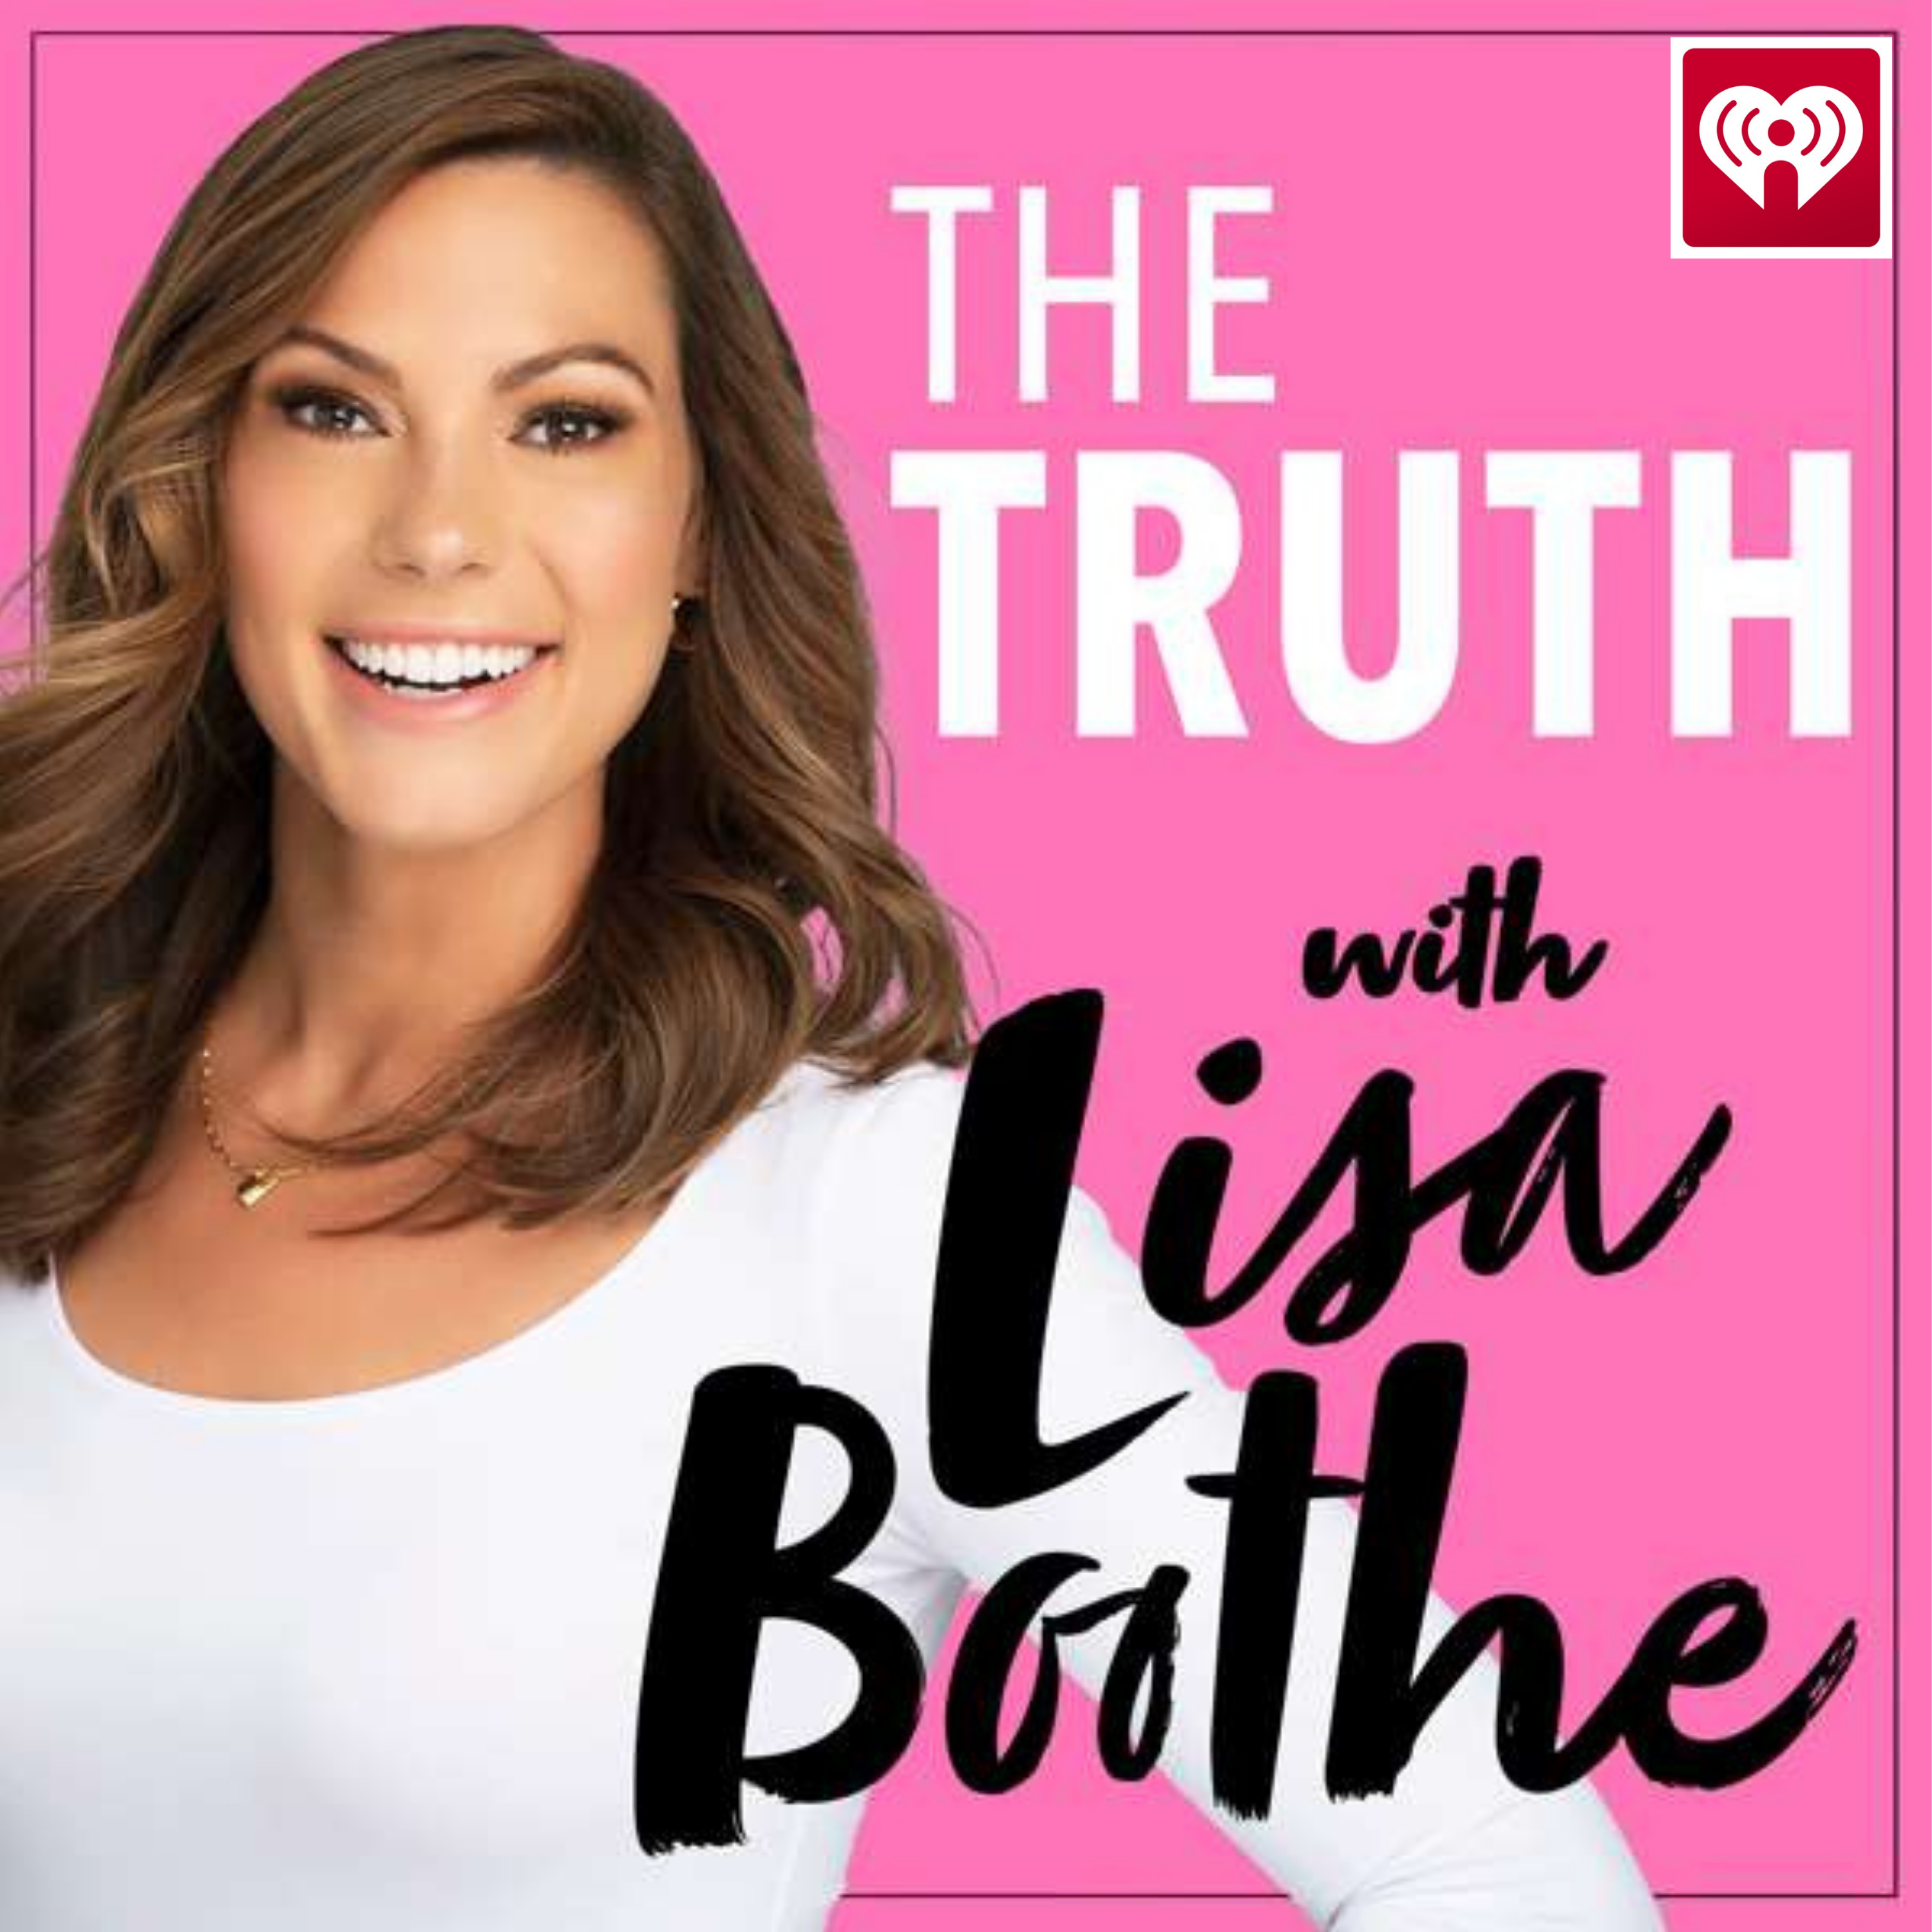 The Truth with Lisa Boothe:  How the Elites Betrayed America's Working Class with Batya Ungar-Sargon